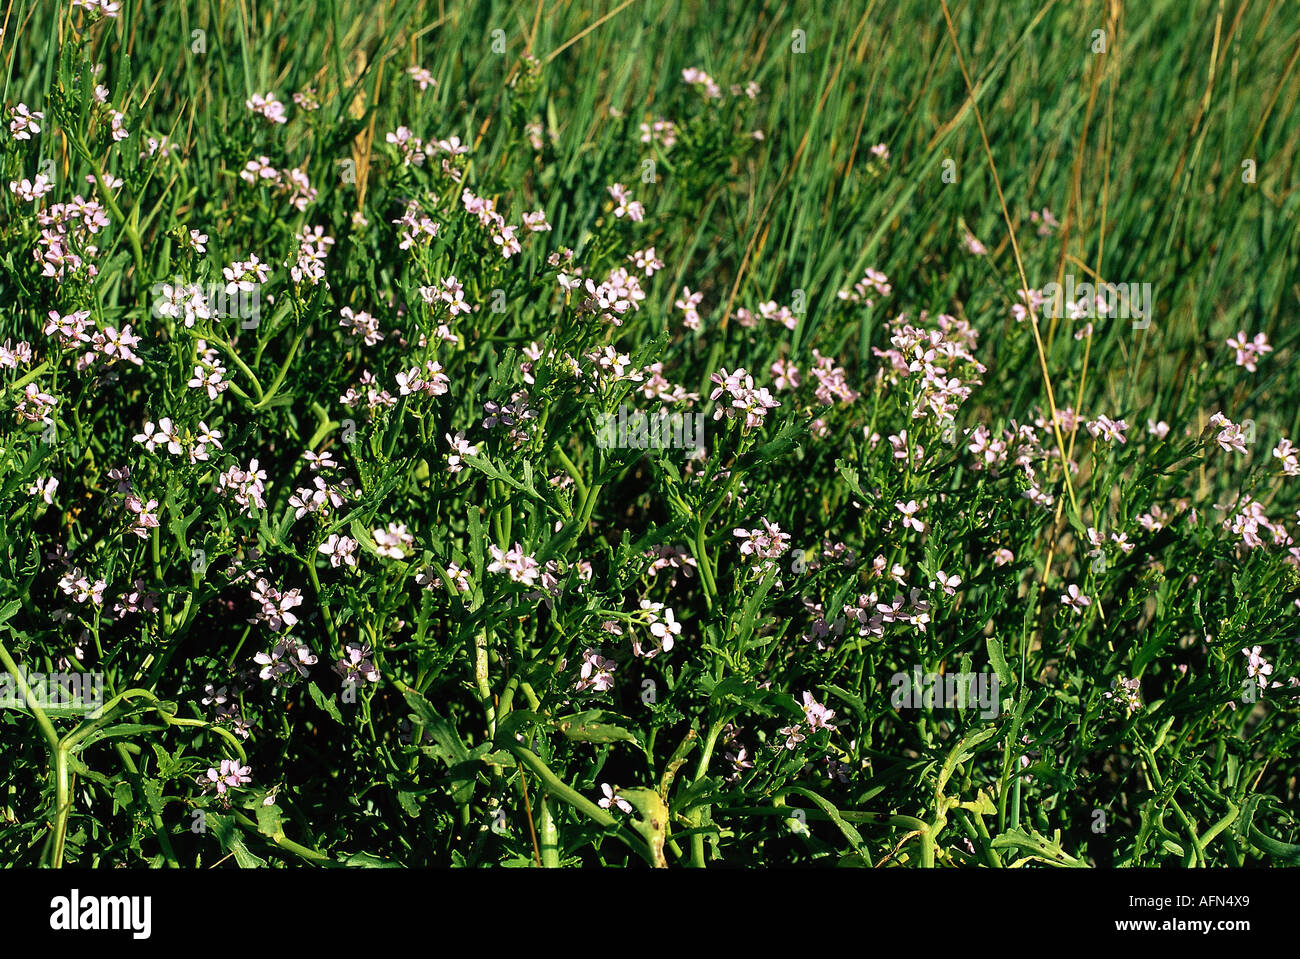 botany, gillyflower (Matthiola), medow with blooming, gillyflowers, blossom, Cruciferae, Brassicaceae, Dilleniidae, Capparales Stock Photo